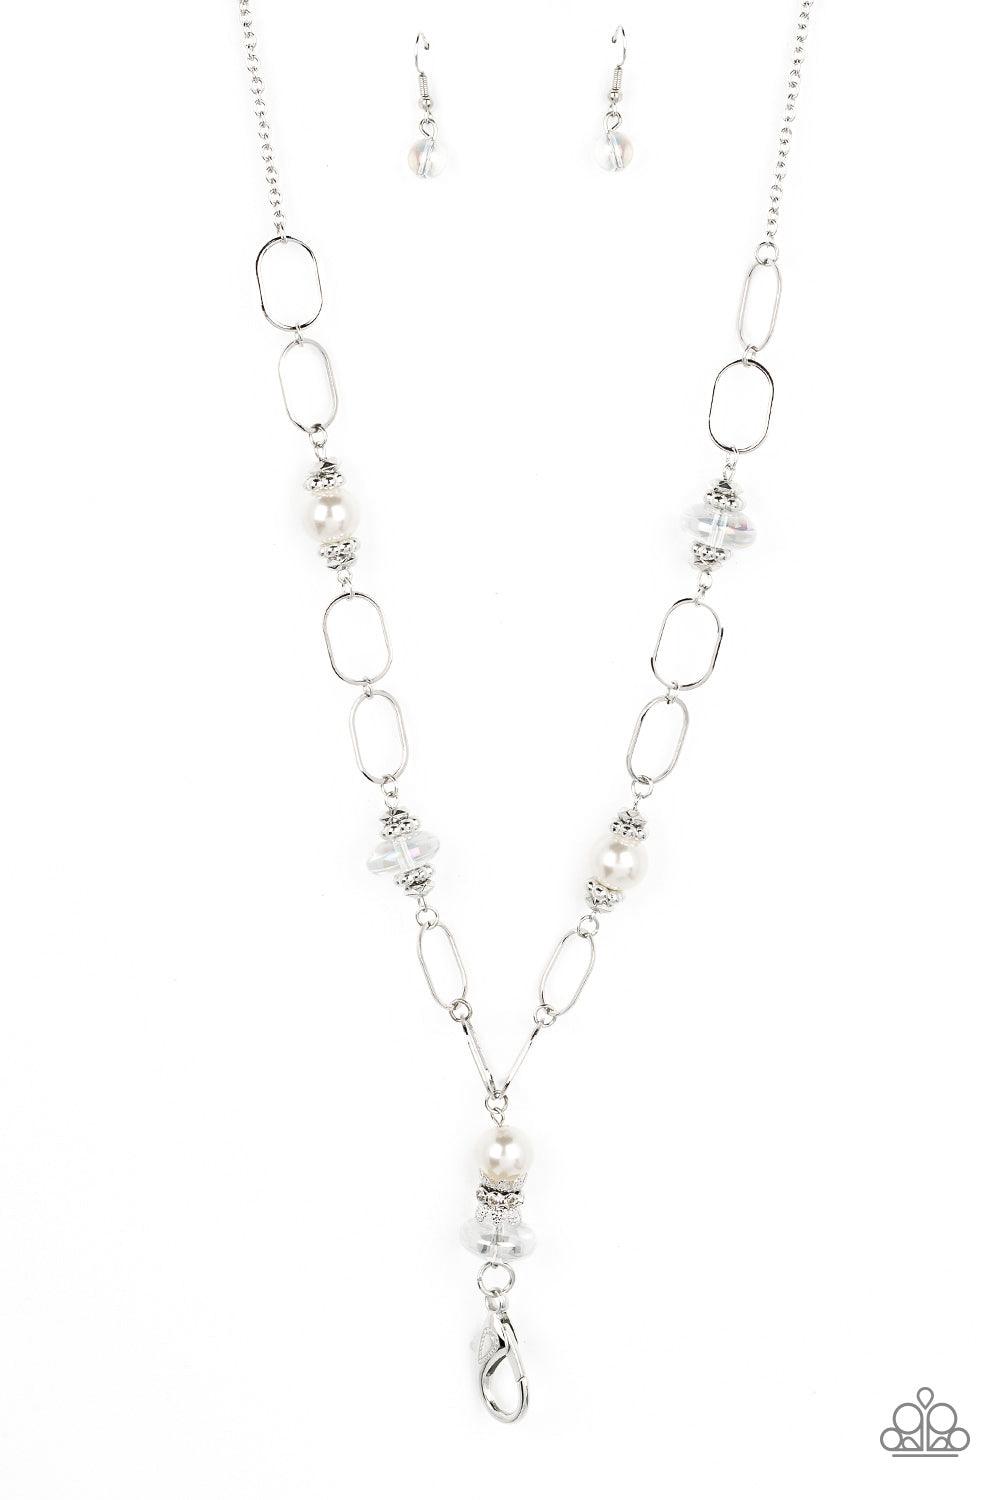 Paparazzi Accessories Creative Couture - White *Lanyard Infused with faceted and studded silver accents, iridescent beads and oversized white pearls connect with sections of oversized silver hoops across the chest for a refined flair. A lobster clasp hang